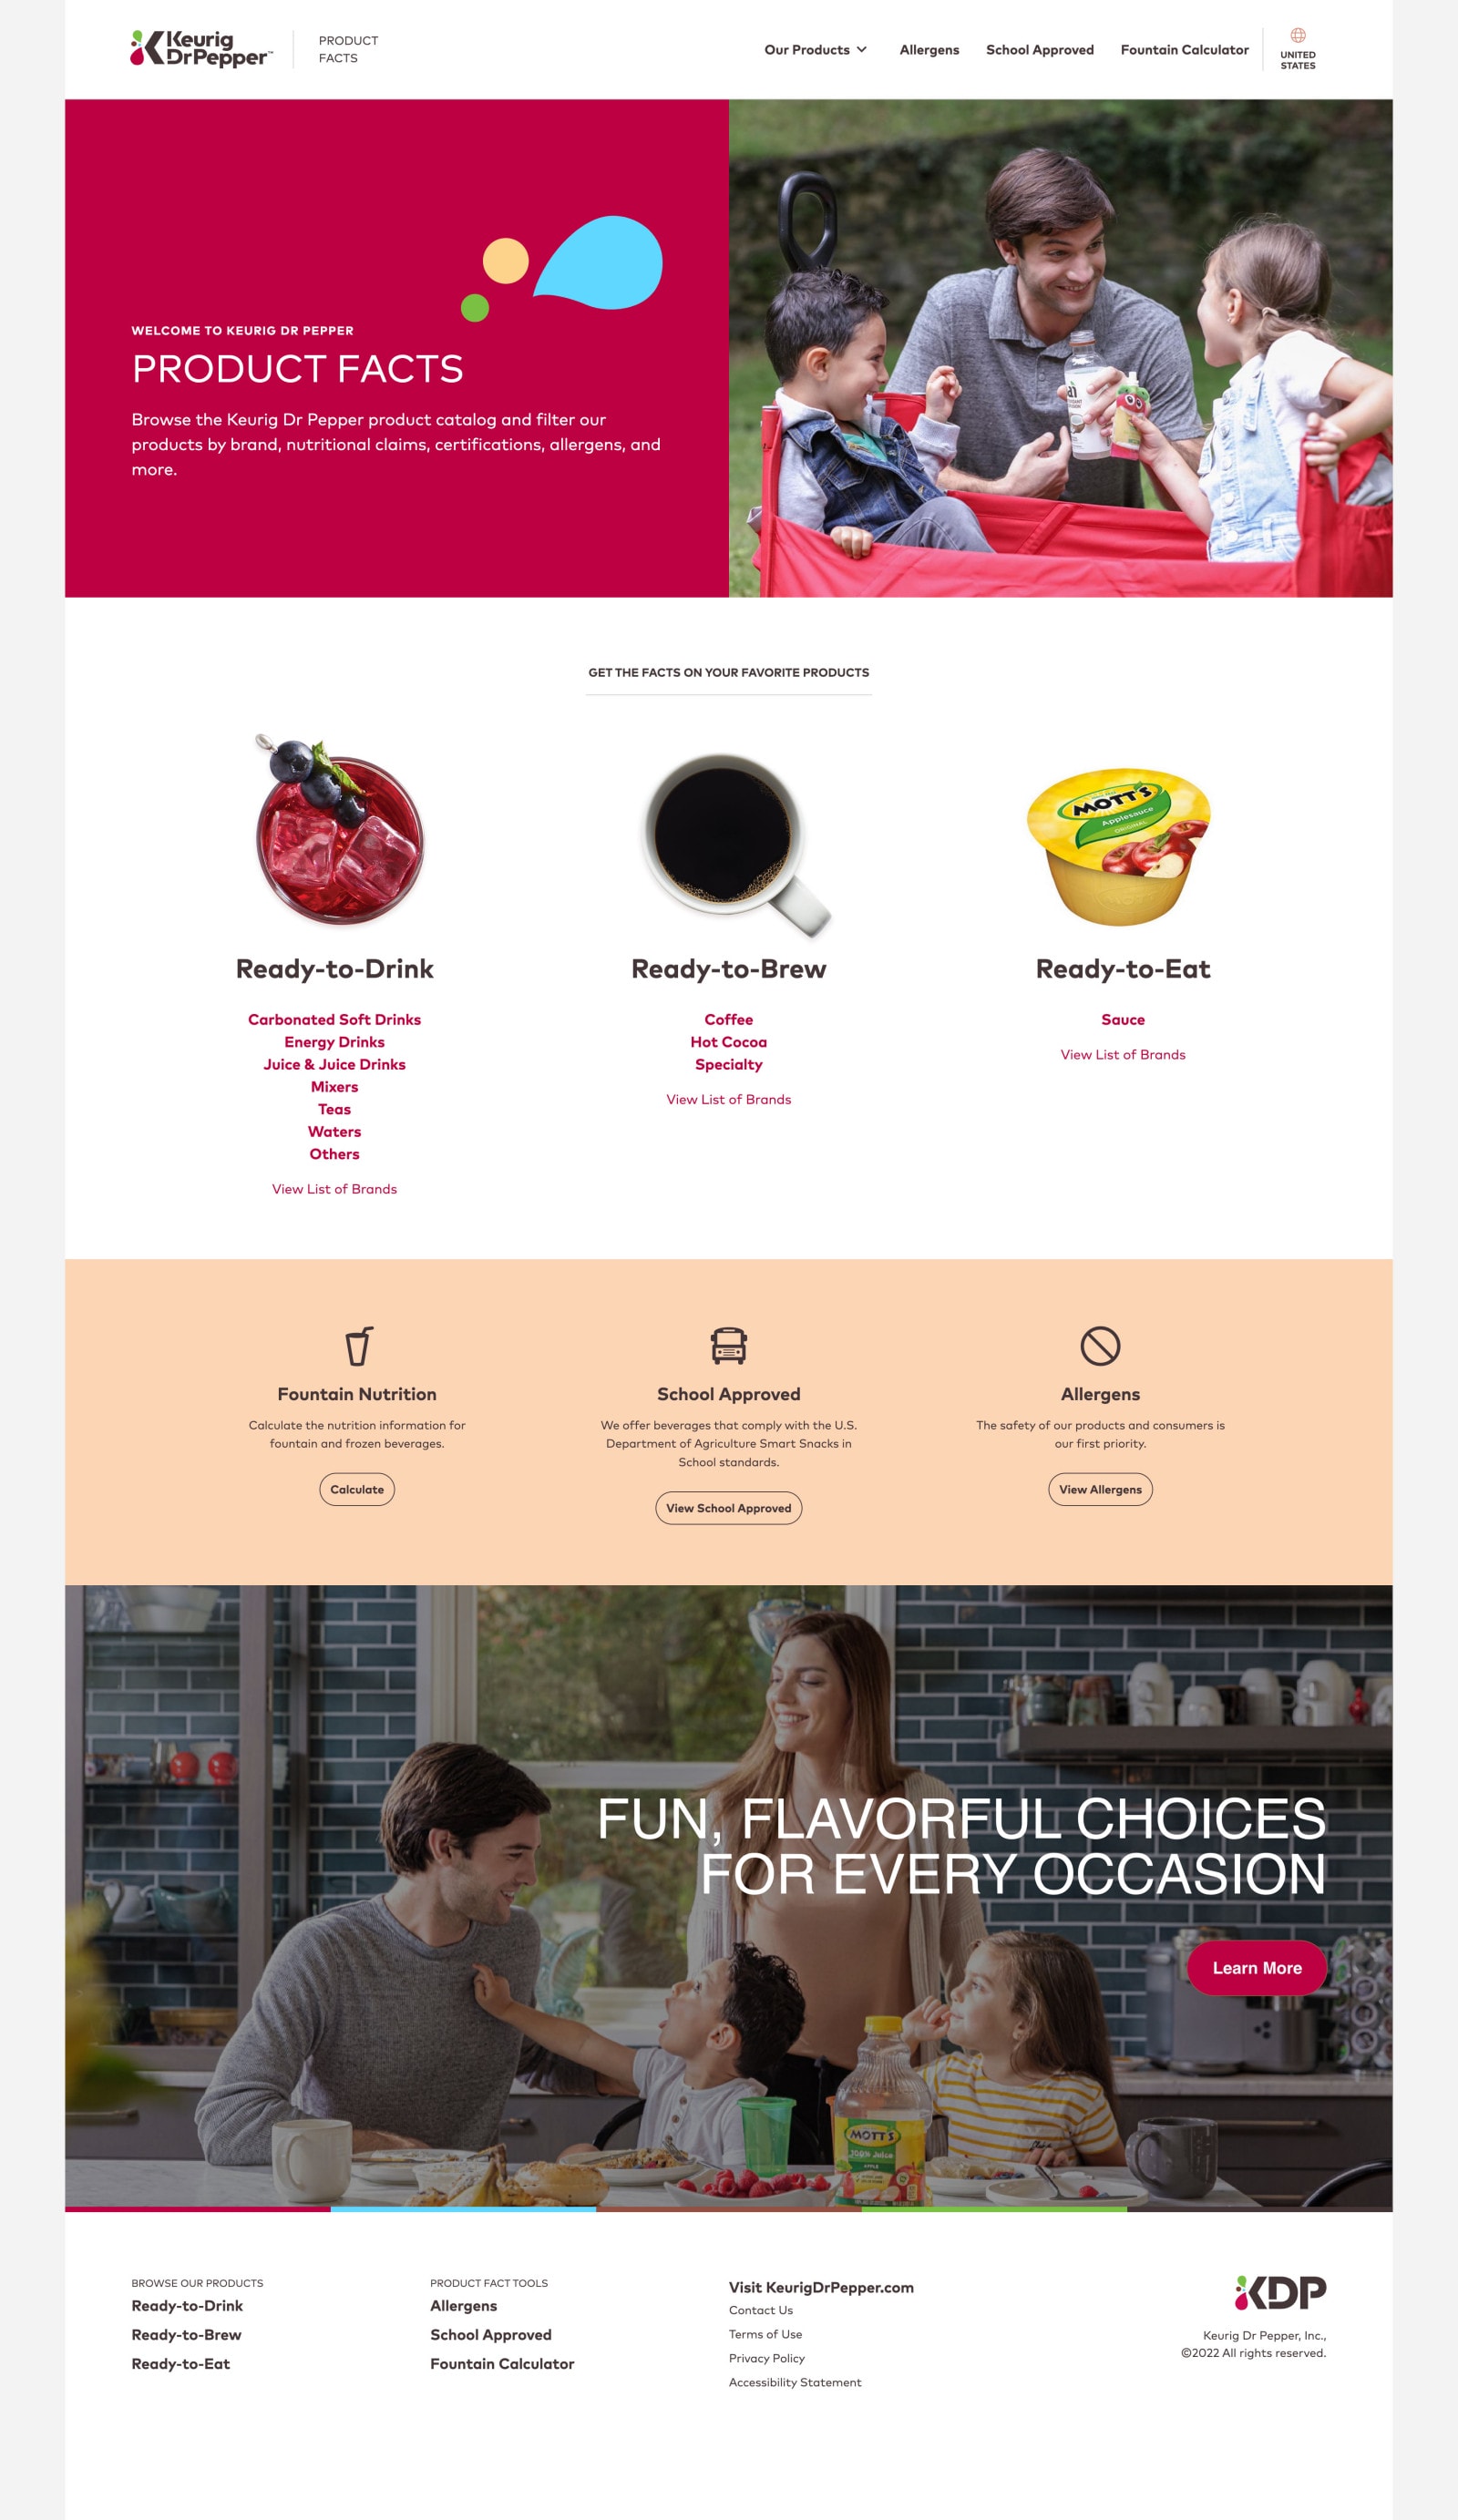 Keurig Dr Pepper product facts homepage